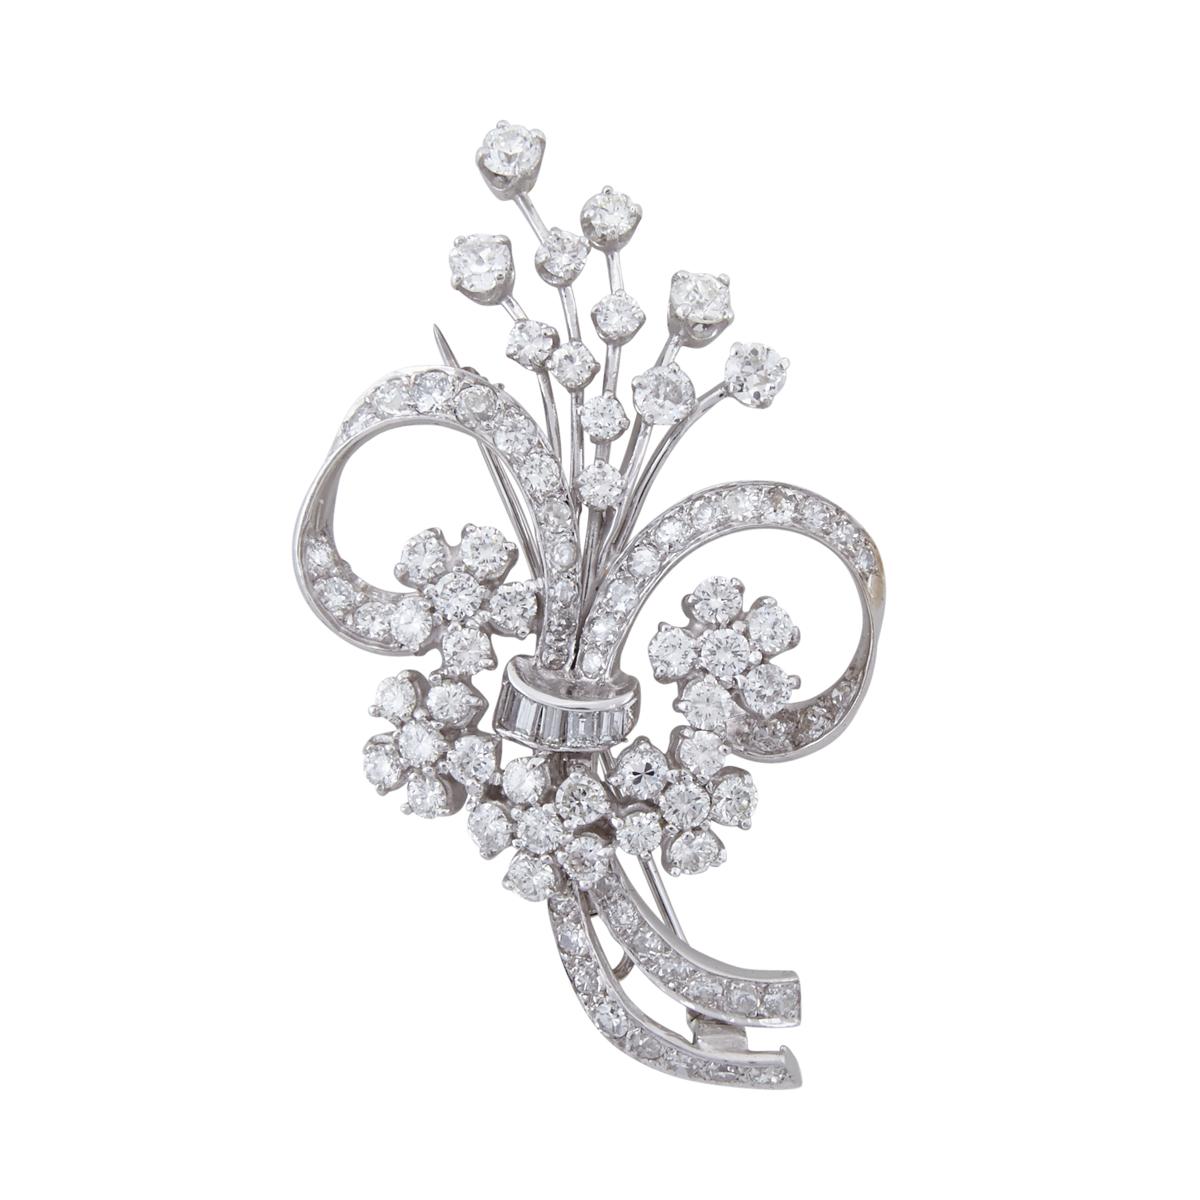 Platinum And 14k White Gold Floral Spray Brooch/Pendant